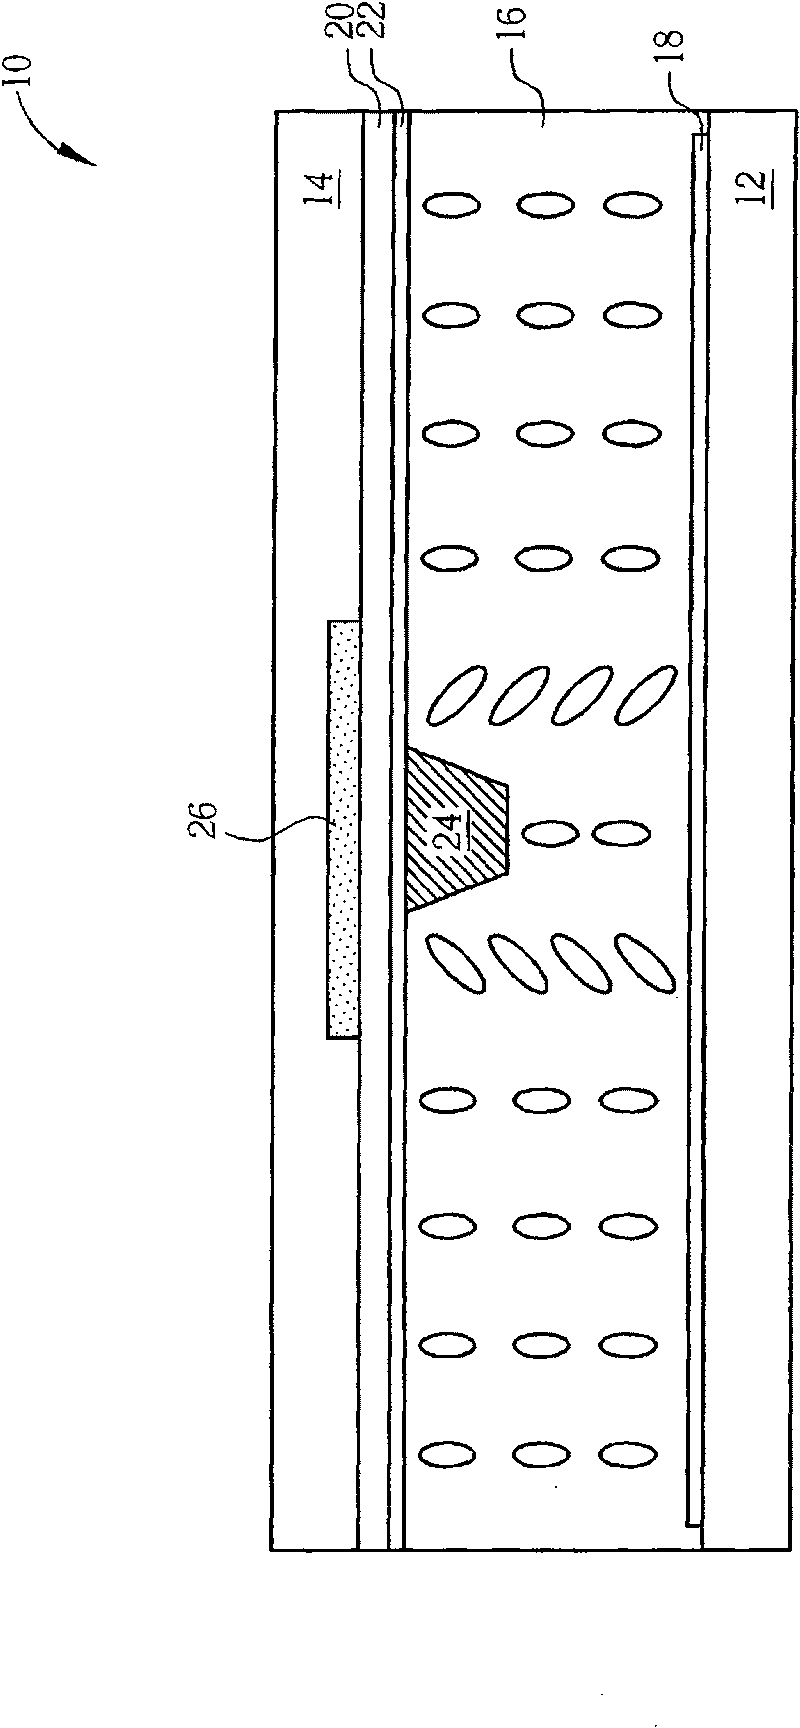 Liquid crystal display panel and pixel structure thereof